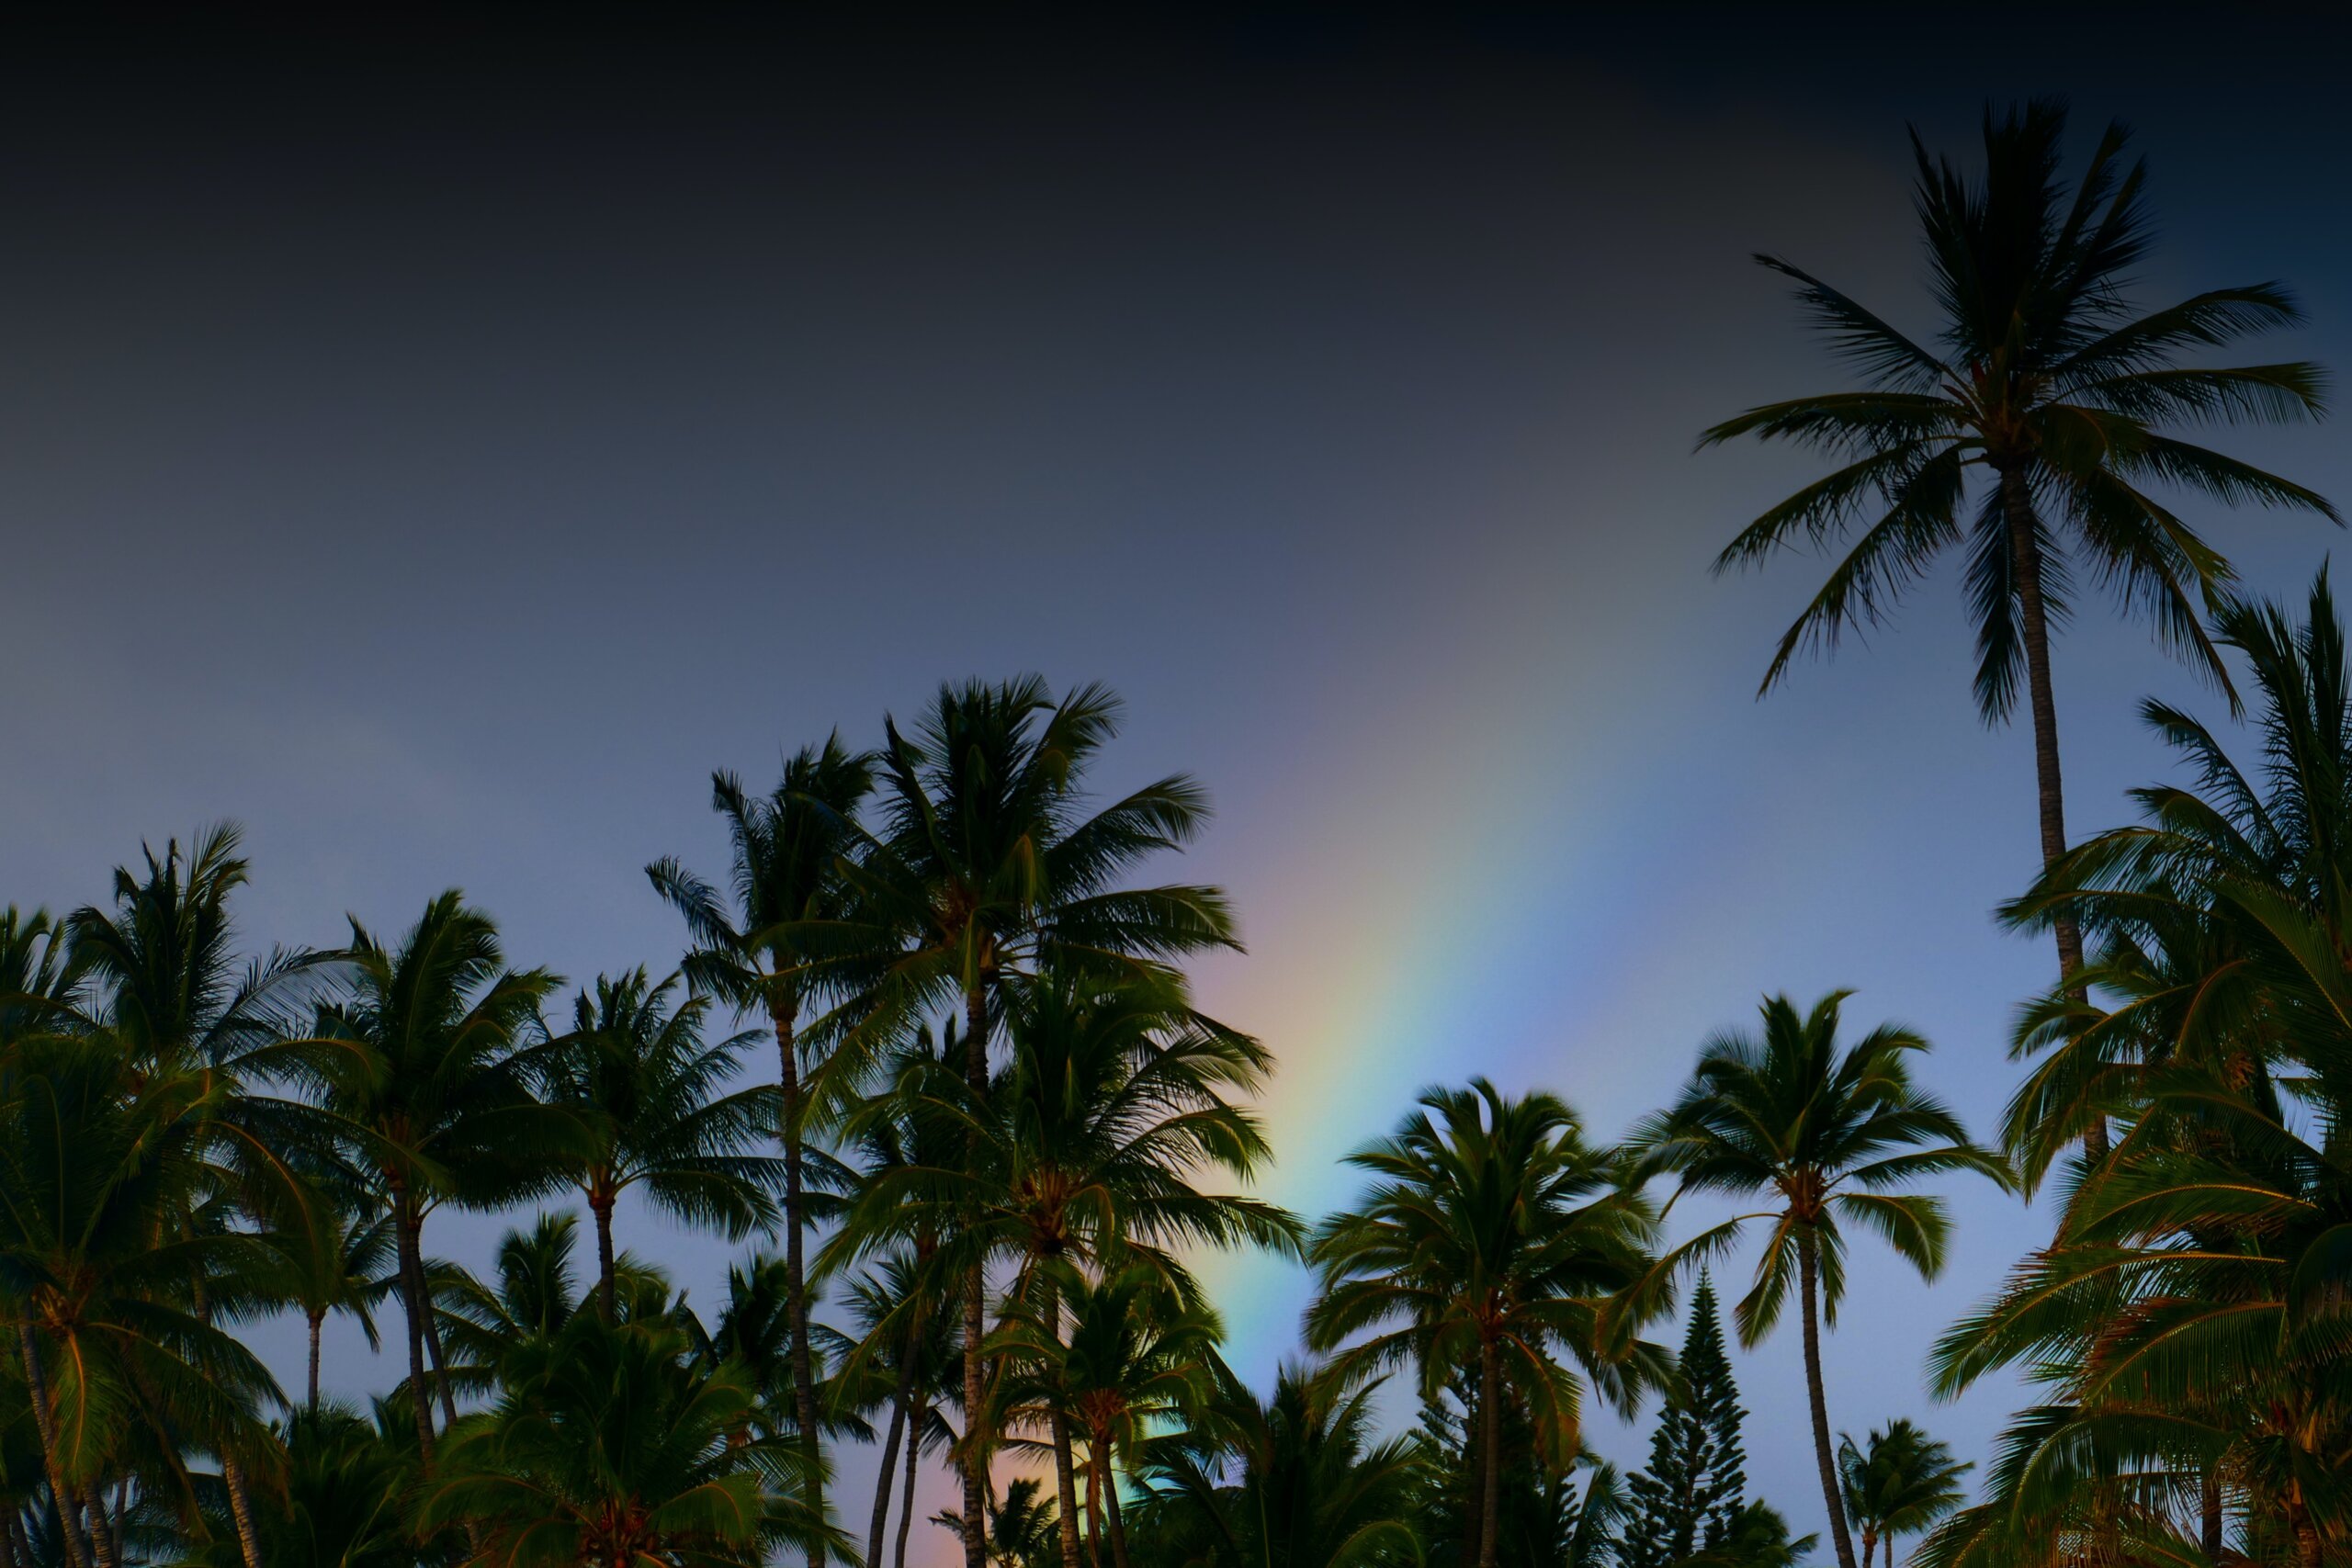 Rainbow in sky above palm trees